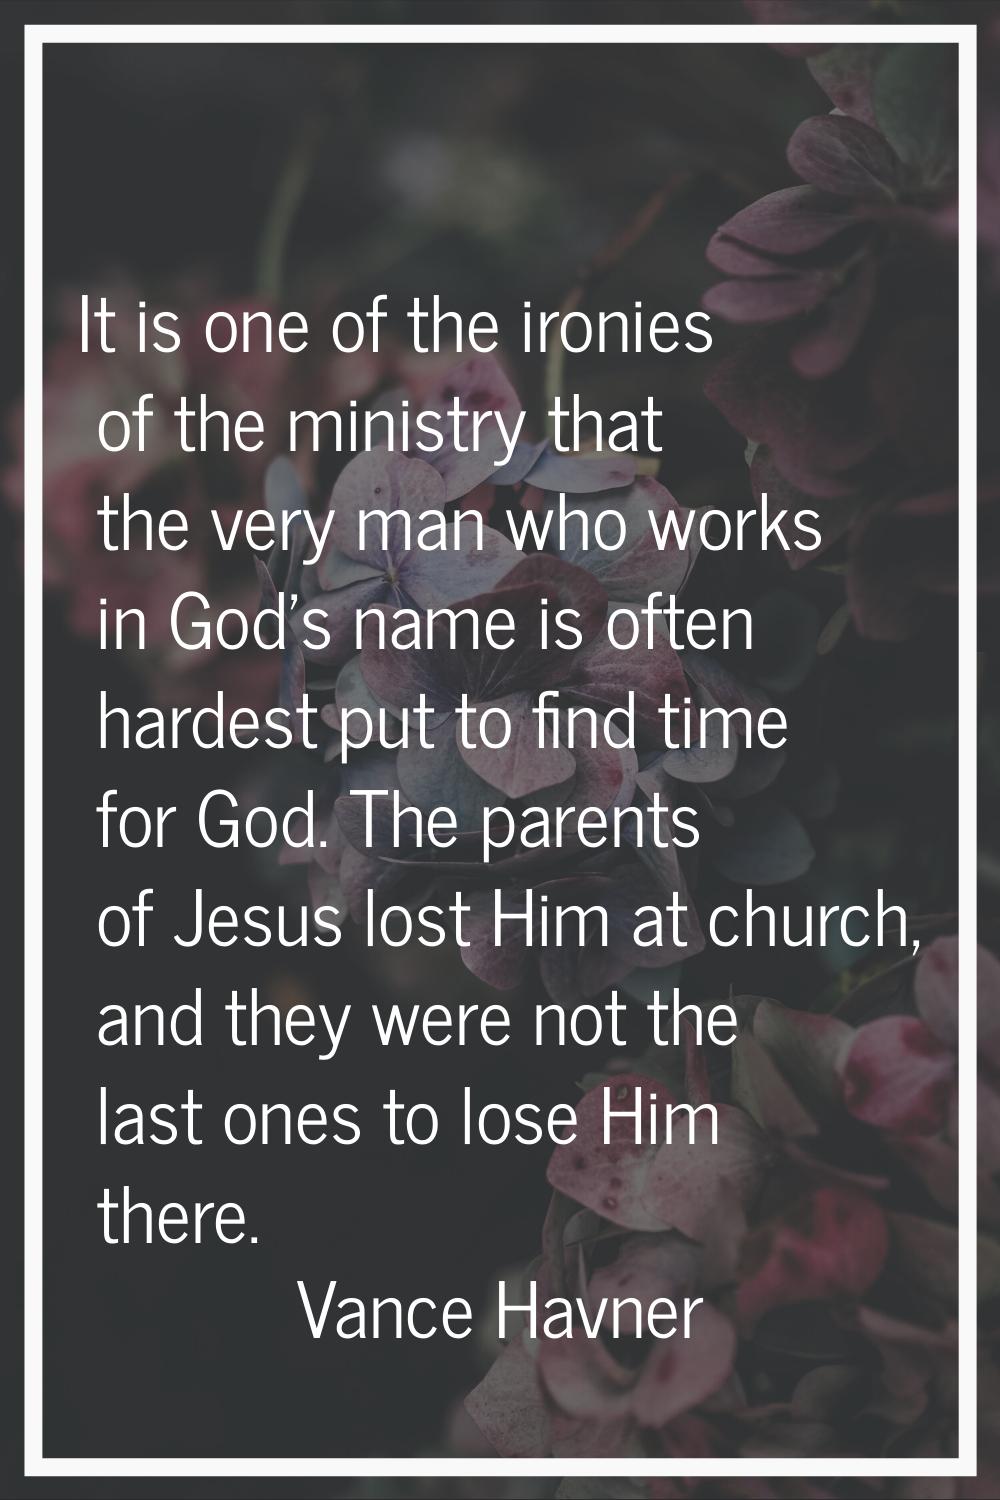 It is one of the ironies of the ministry that the very man who works in God's name is often hardest